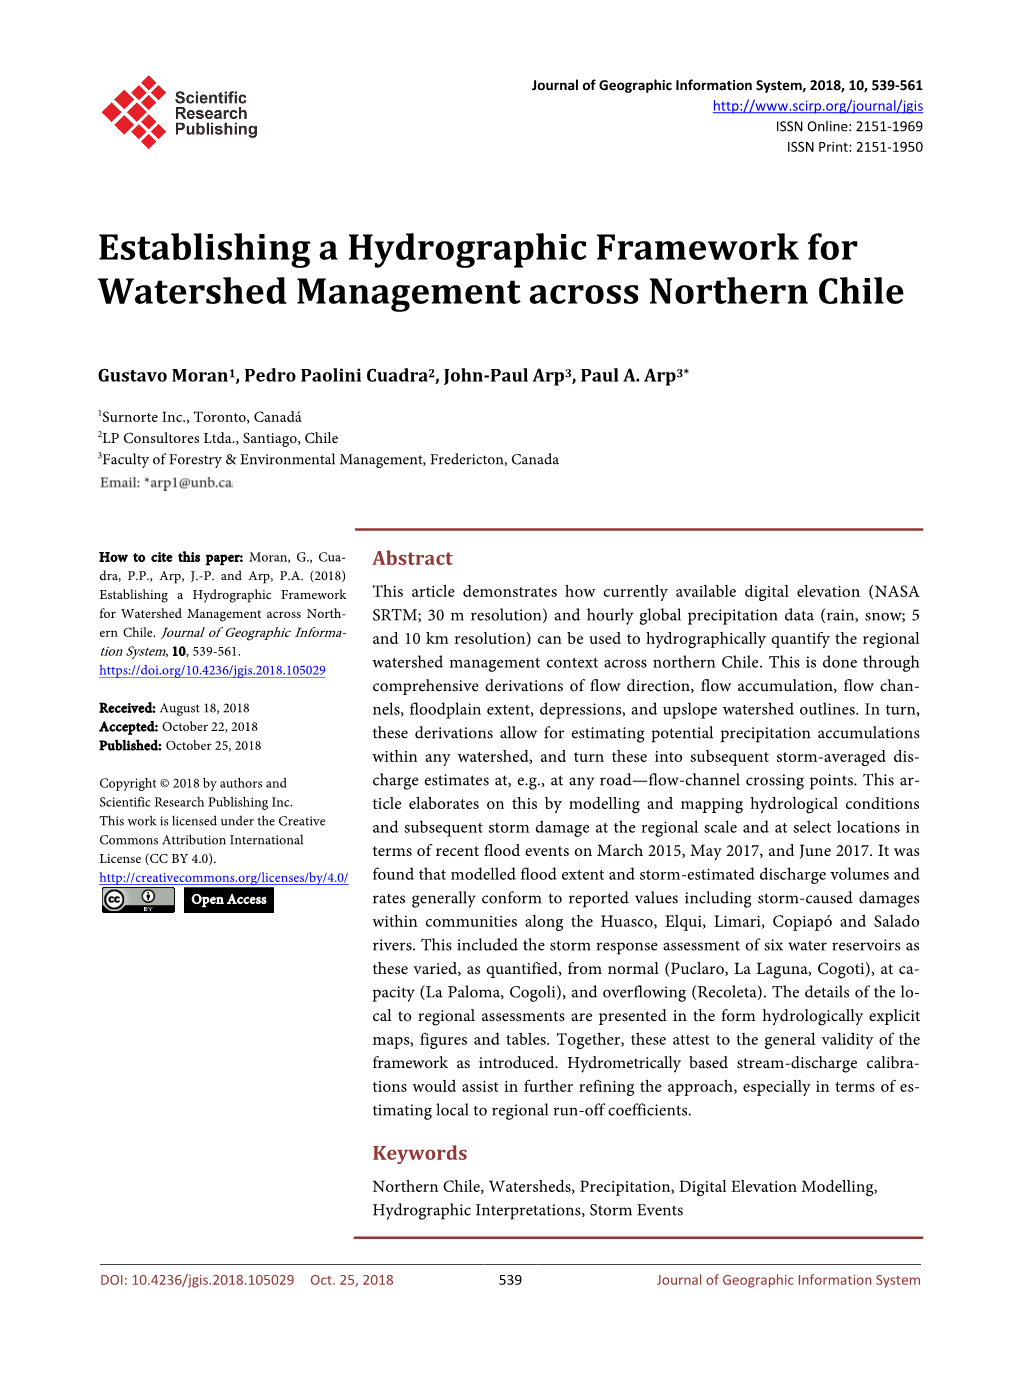 Establishing a Hydrographic Framework for Watershed Management Across Northern Chile